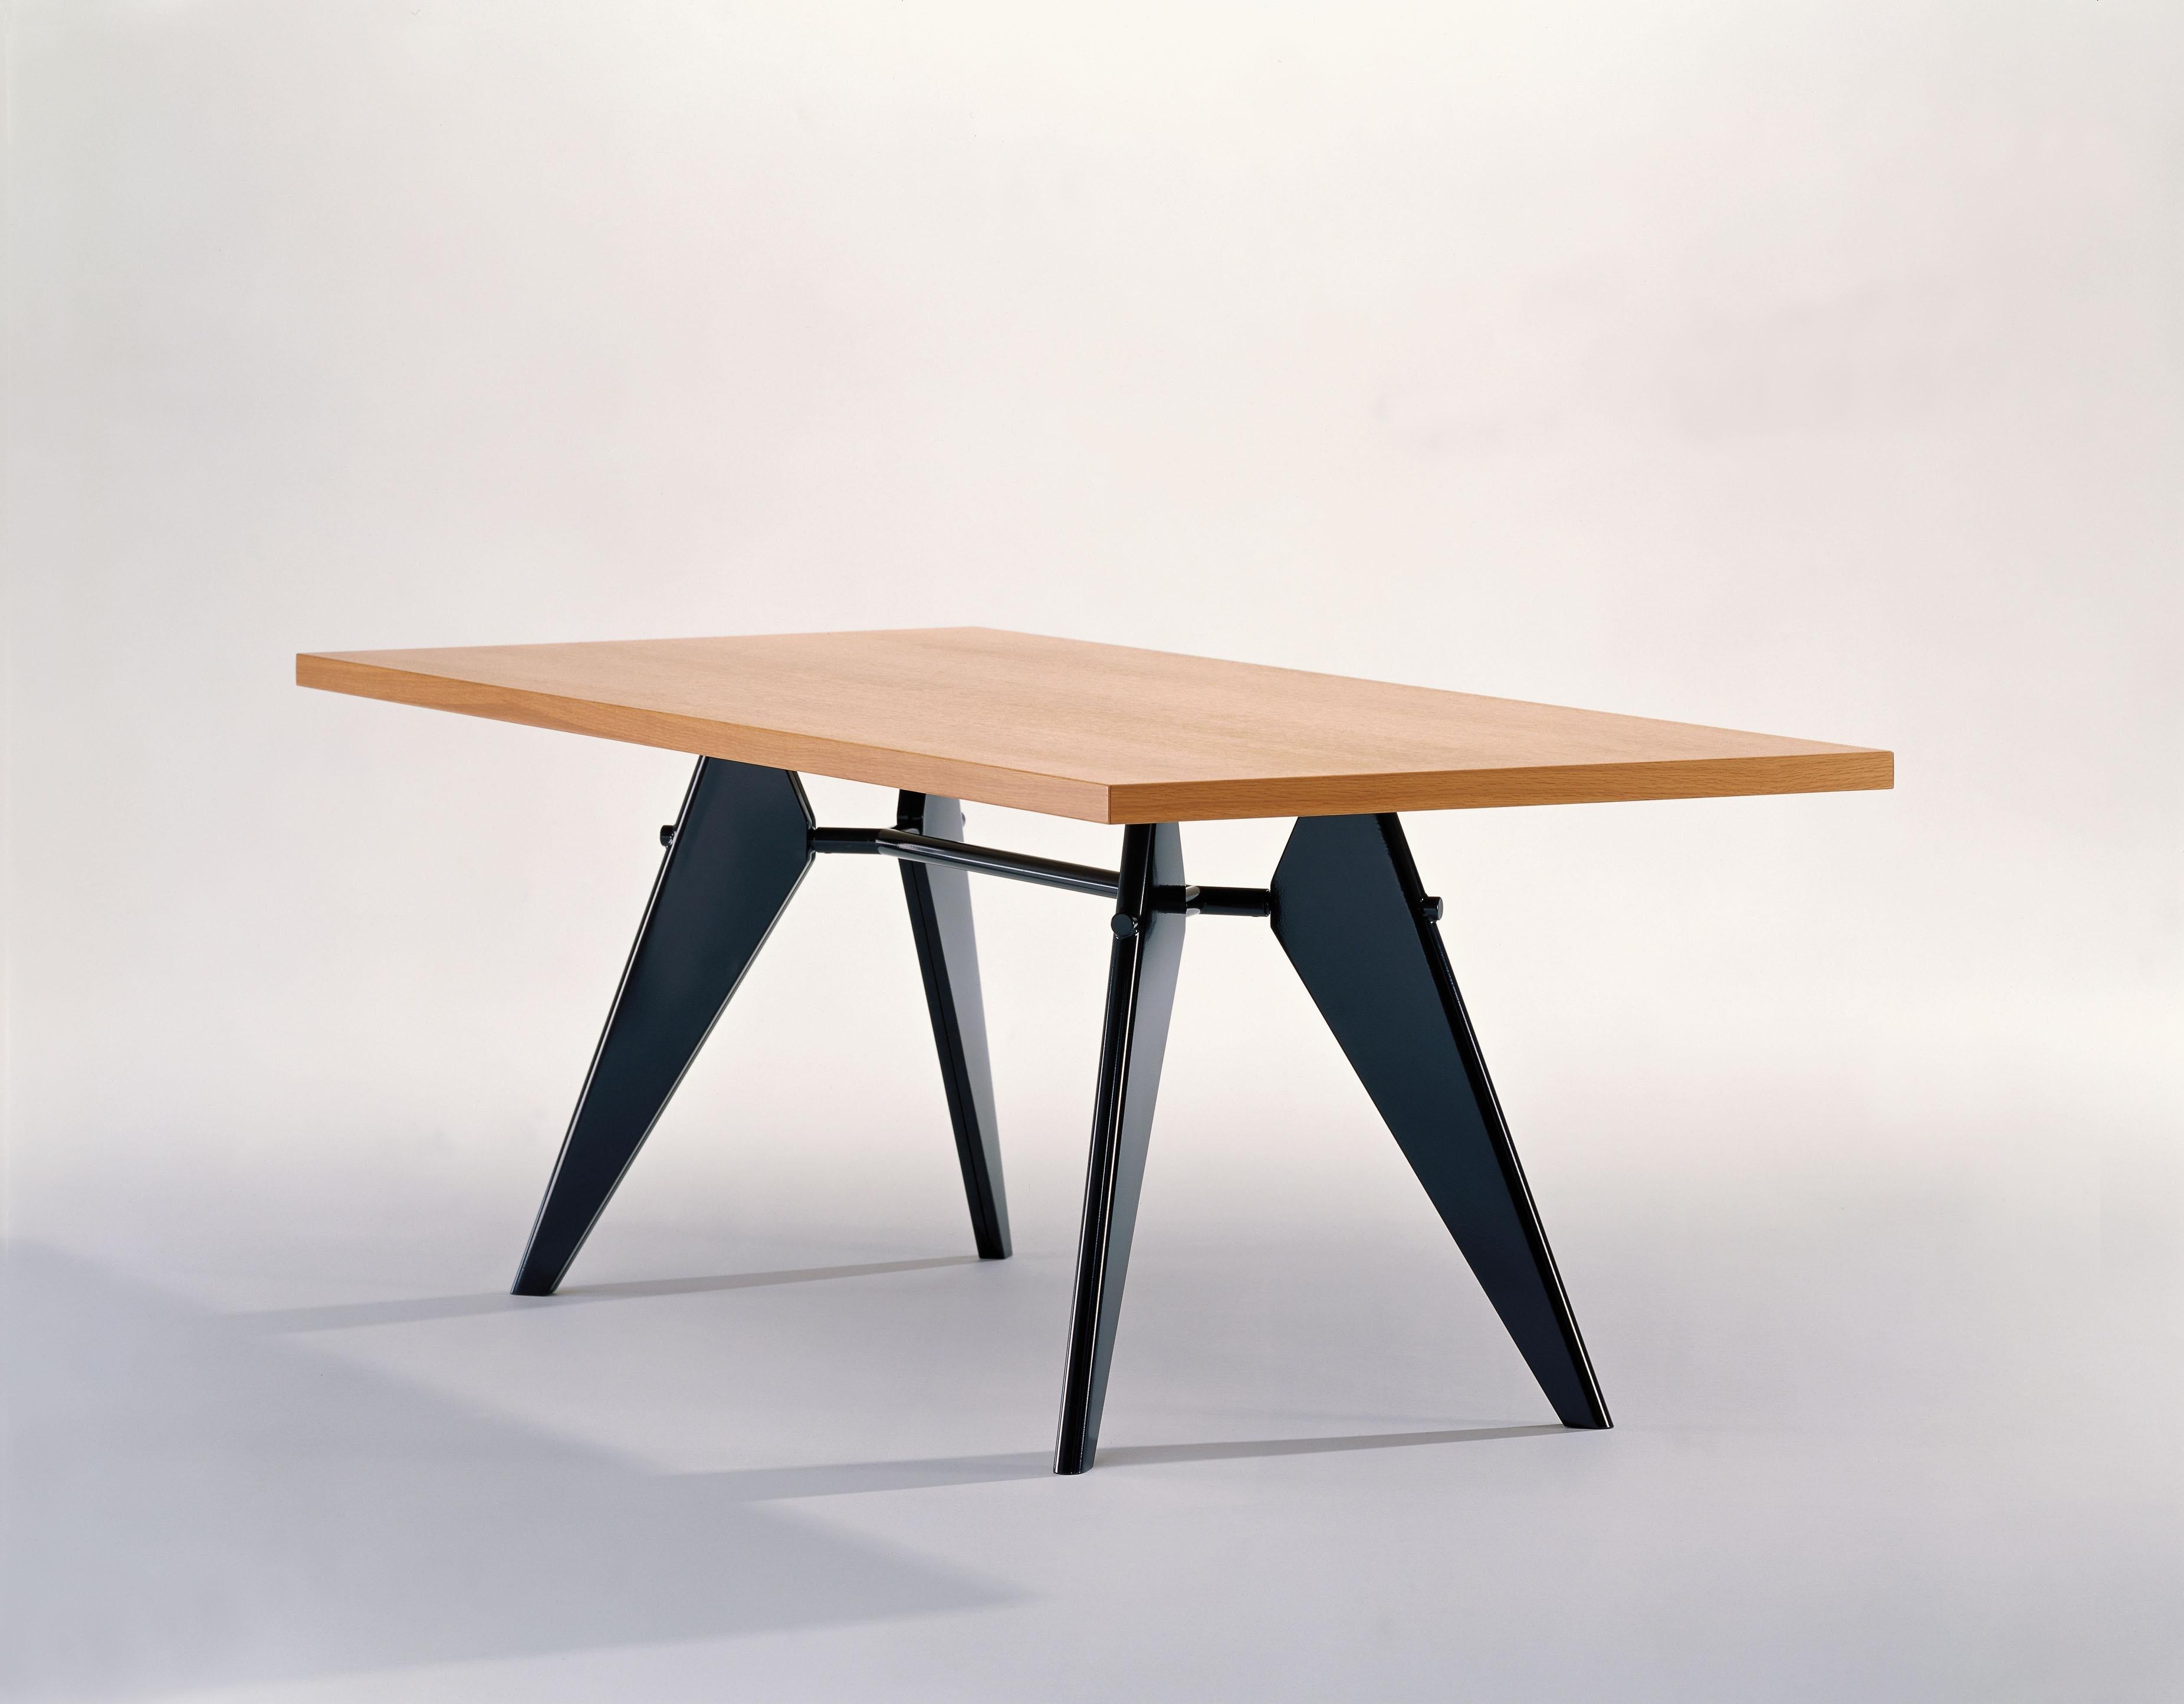 These items are currently only available in the United States.

The aesthetic appearance of Jean Prouvé's EM Table adheres to structural principles, illustrating the flow of forces and stresses in its construction. It comes in a range of sizes with